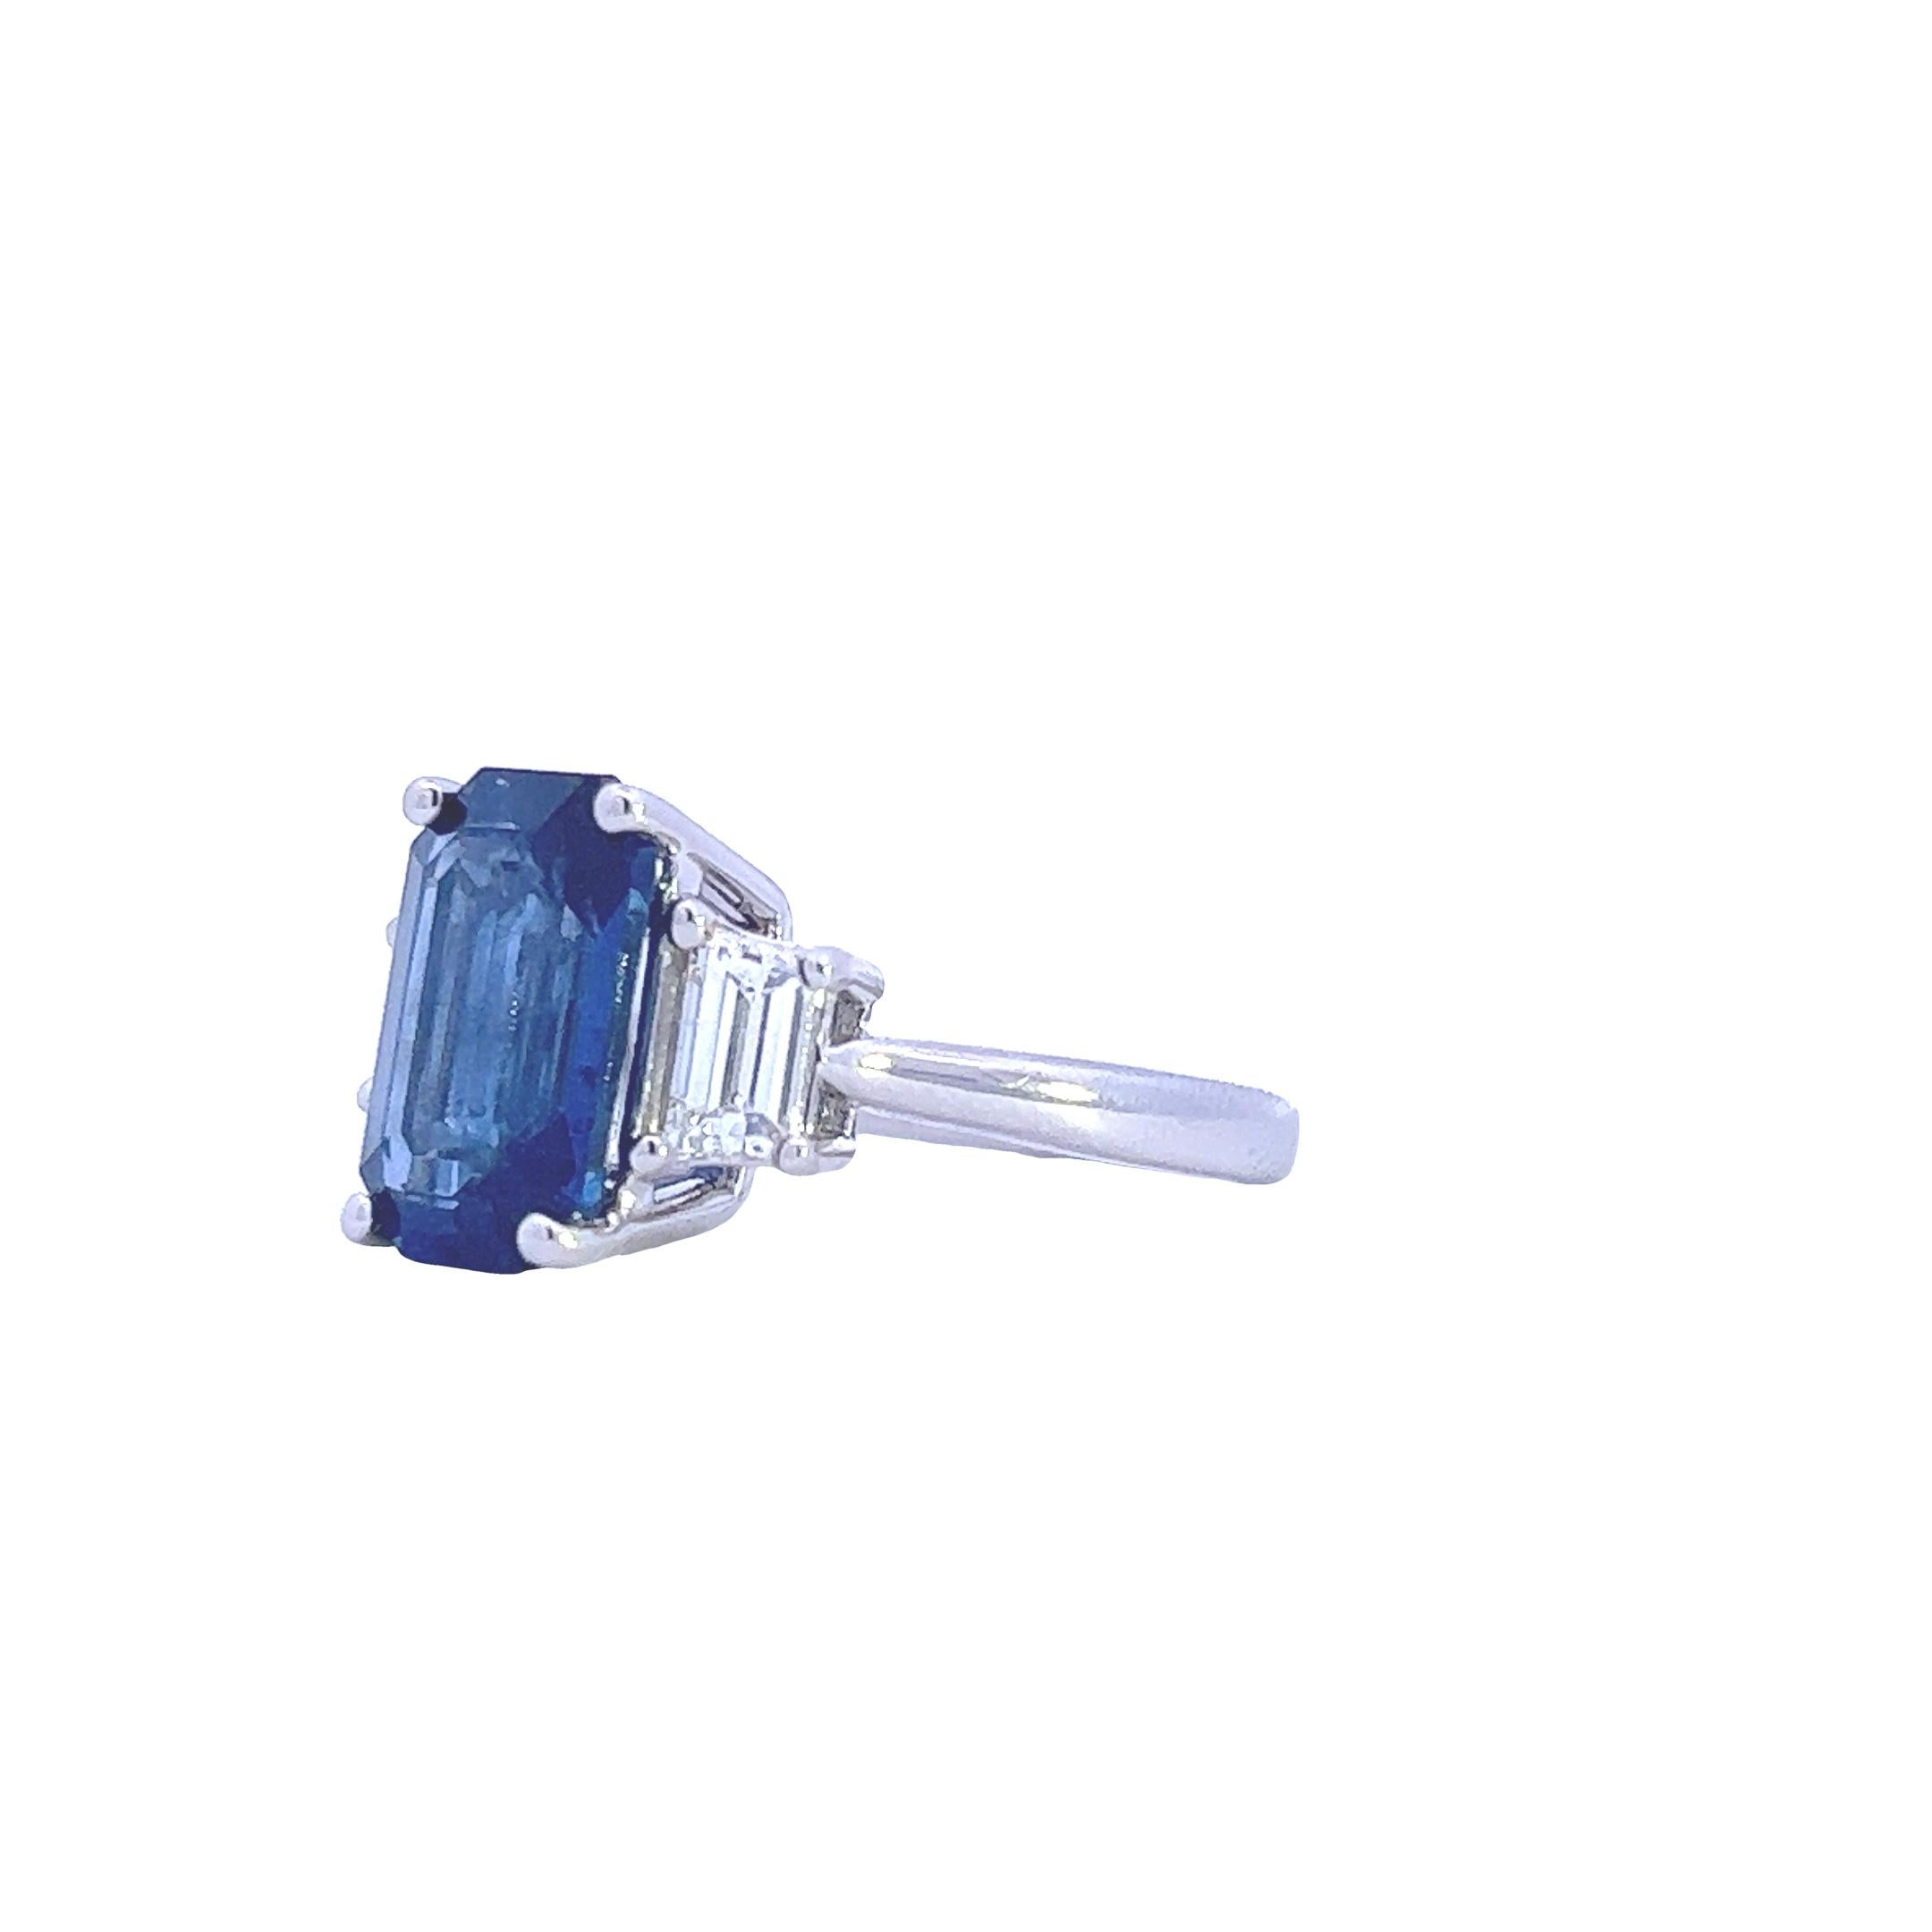 Emerald Cut Exquisite 5.25ct Sapphire and 0.75ct Diamond Ring in 18k White Gold - CDC Cert For Sale